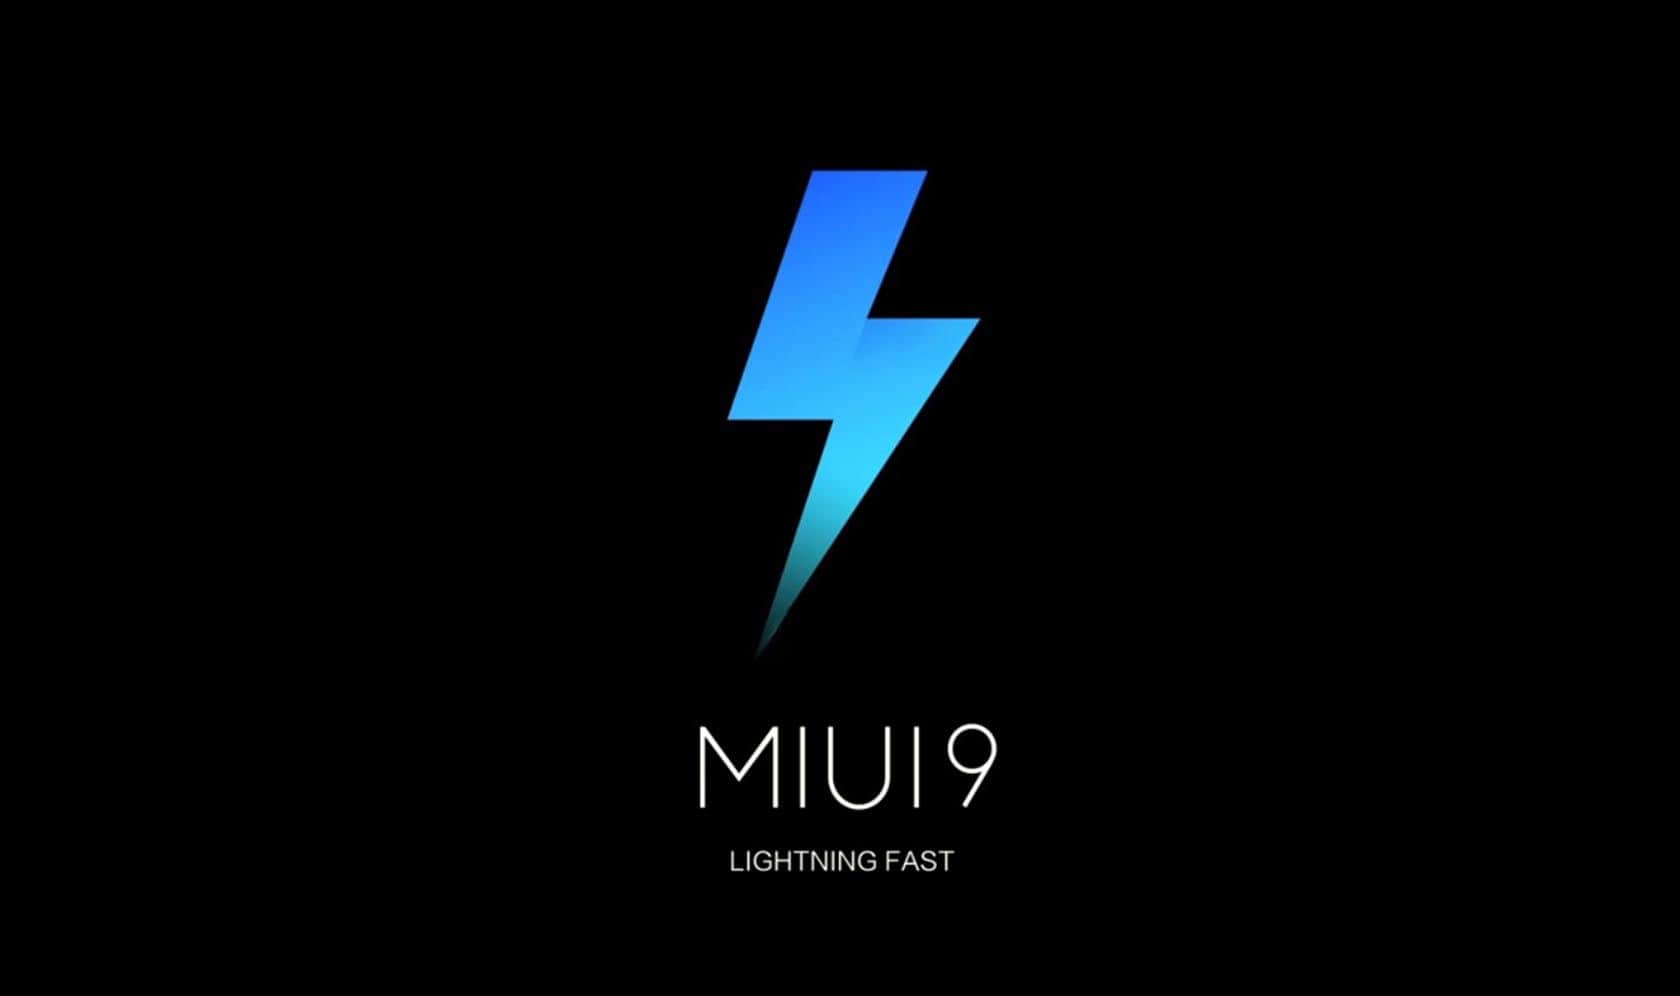 Xiaomi has expanded the list of devices that will receive MIUI 9